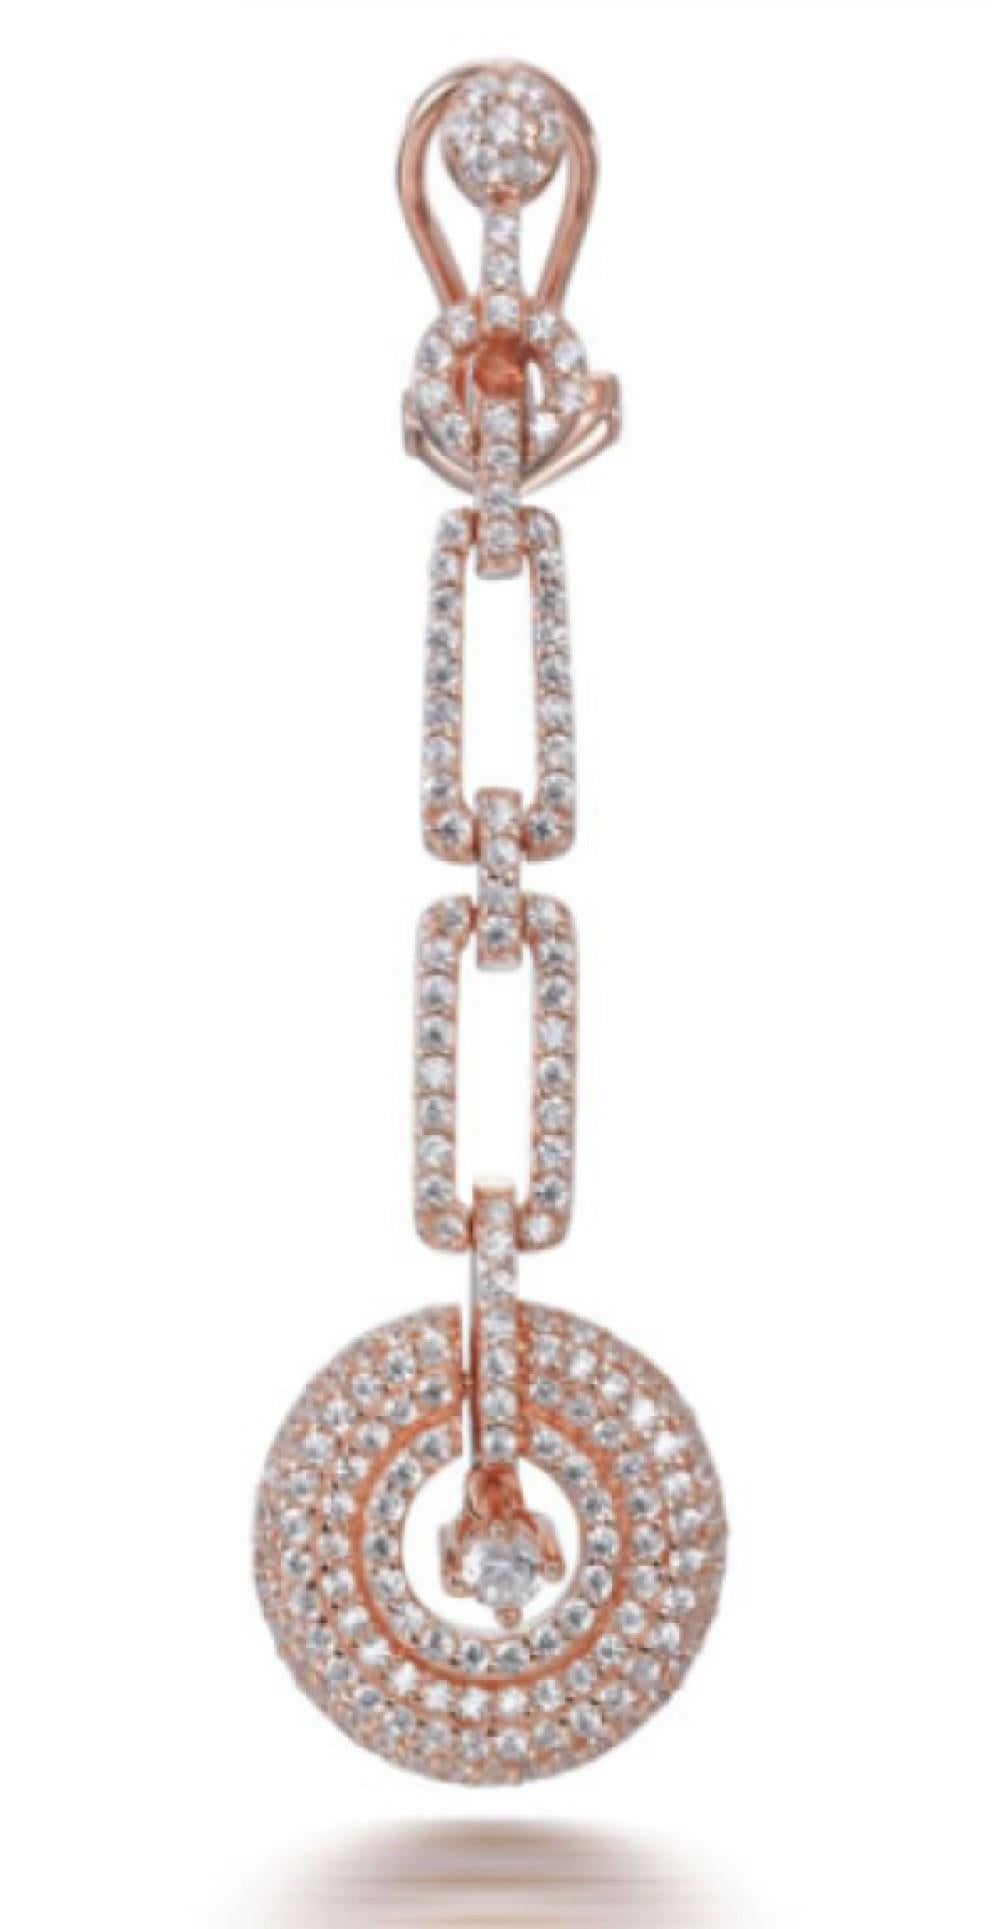 A show stopping design from our Deco Collection, refined and decadent, these beautiful drop earrings feature a solid wheel containing a suspended brilliant cut cubic zirconia hanging from an open chain set onto a stud pierced omega clip.

Composed